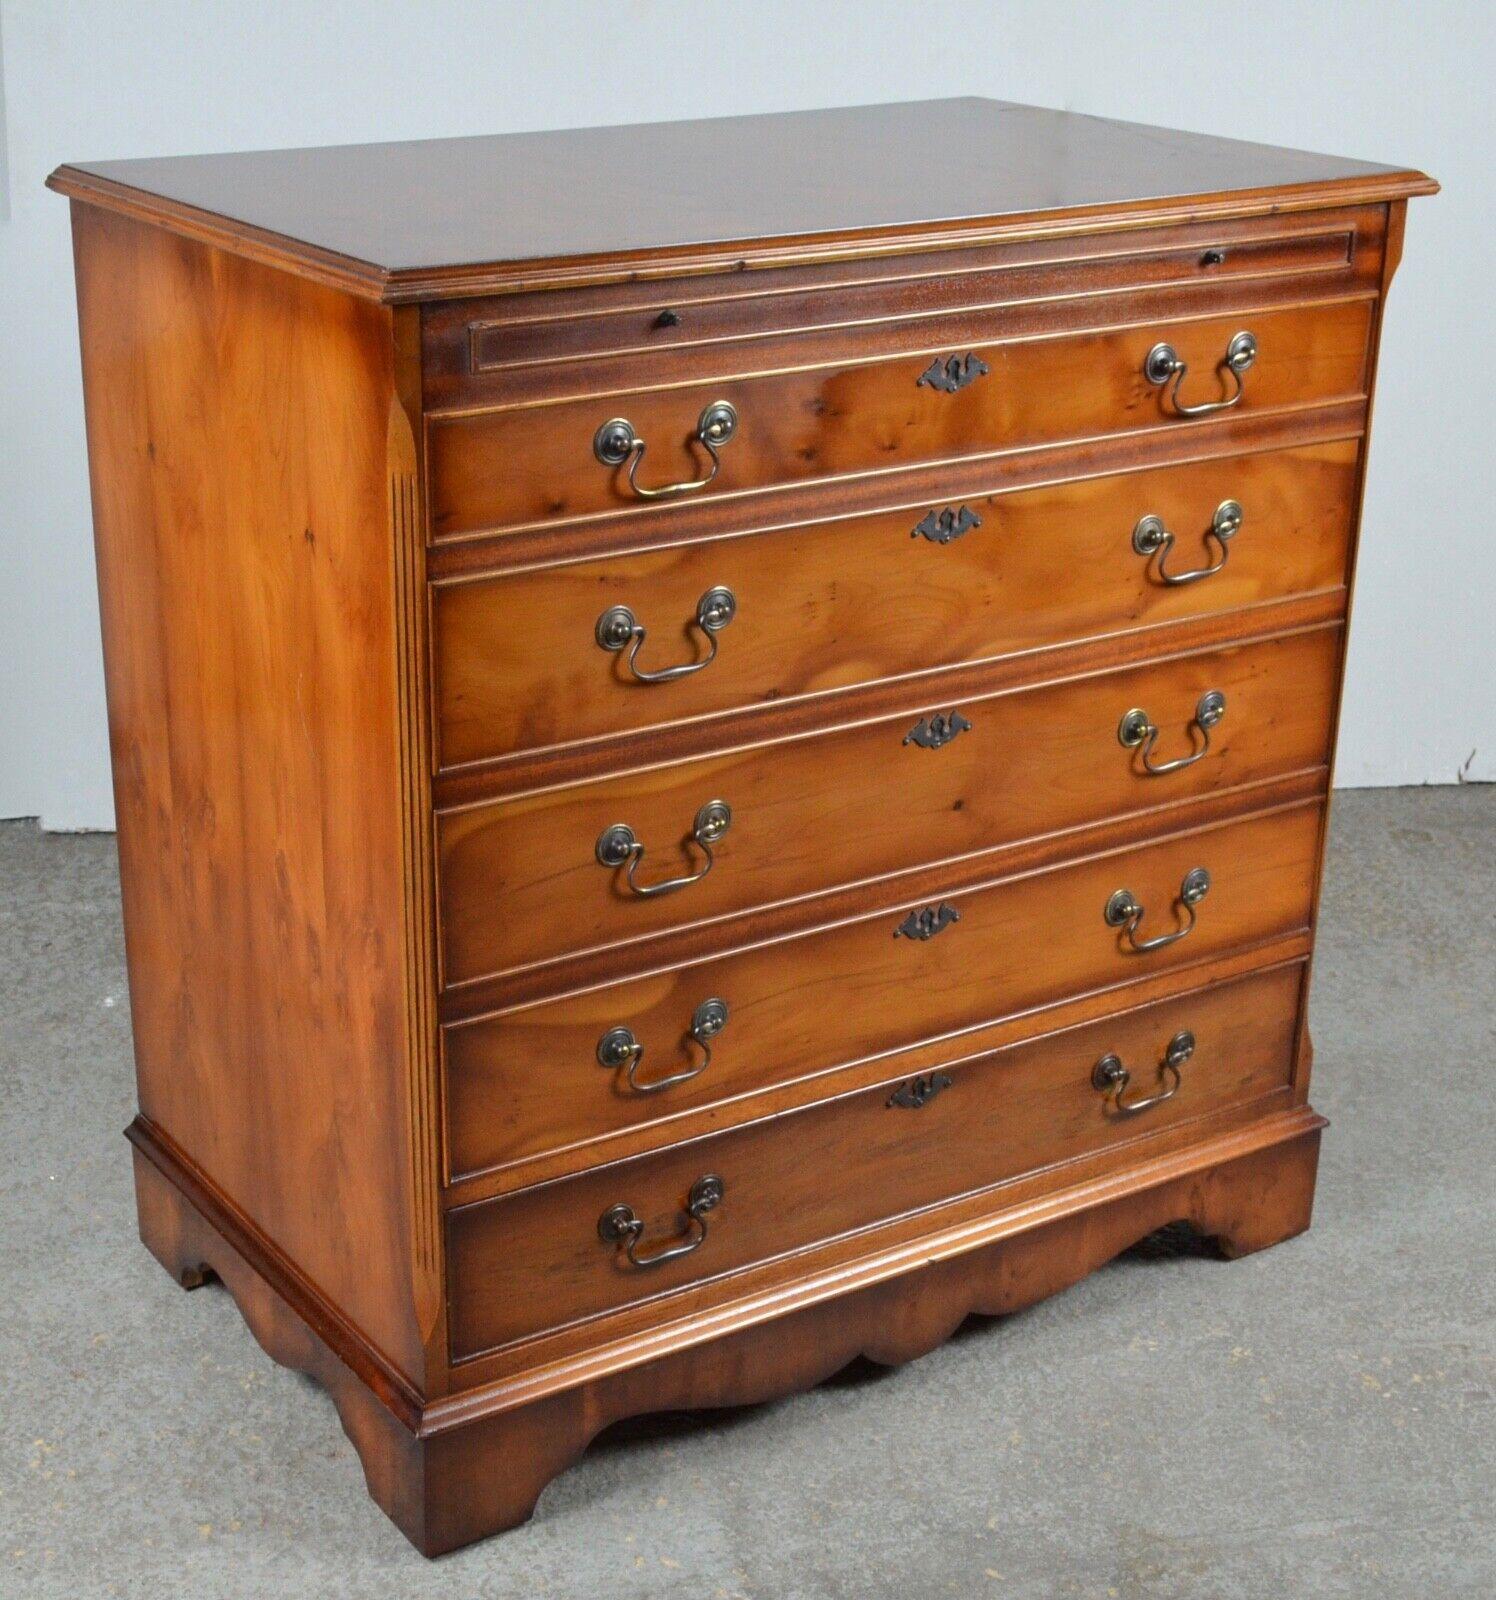 We are delighted to offer for sale this lovely stunning inlaid TV storage cupboard in the style of a Georgian figured walnut and boxwood inlaid chest of drawers, nicely antiqued with boxwood star inlay and solid brass handles and